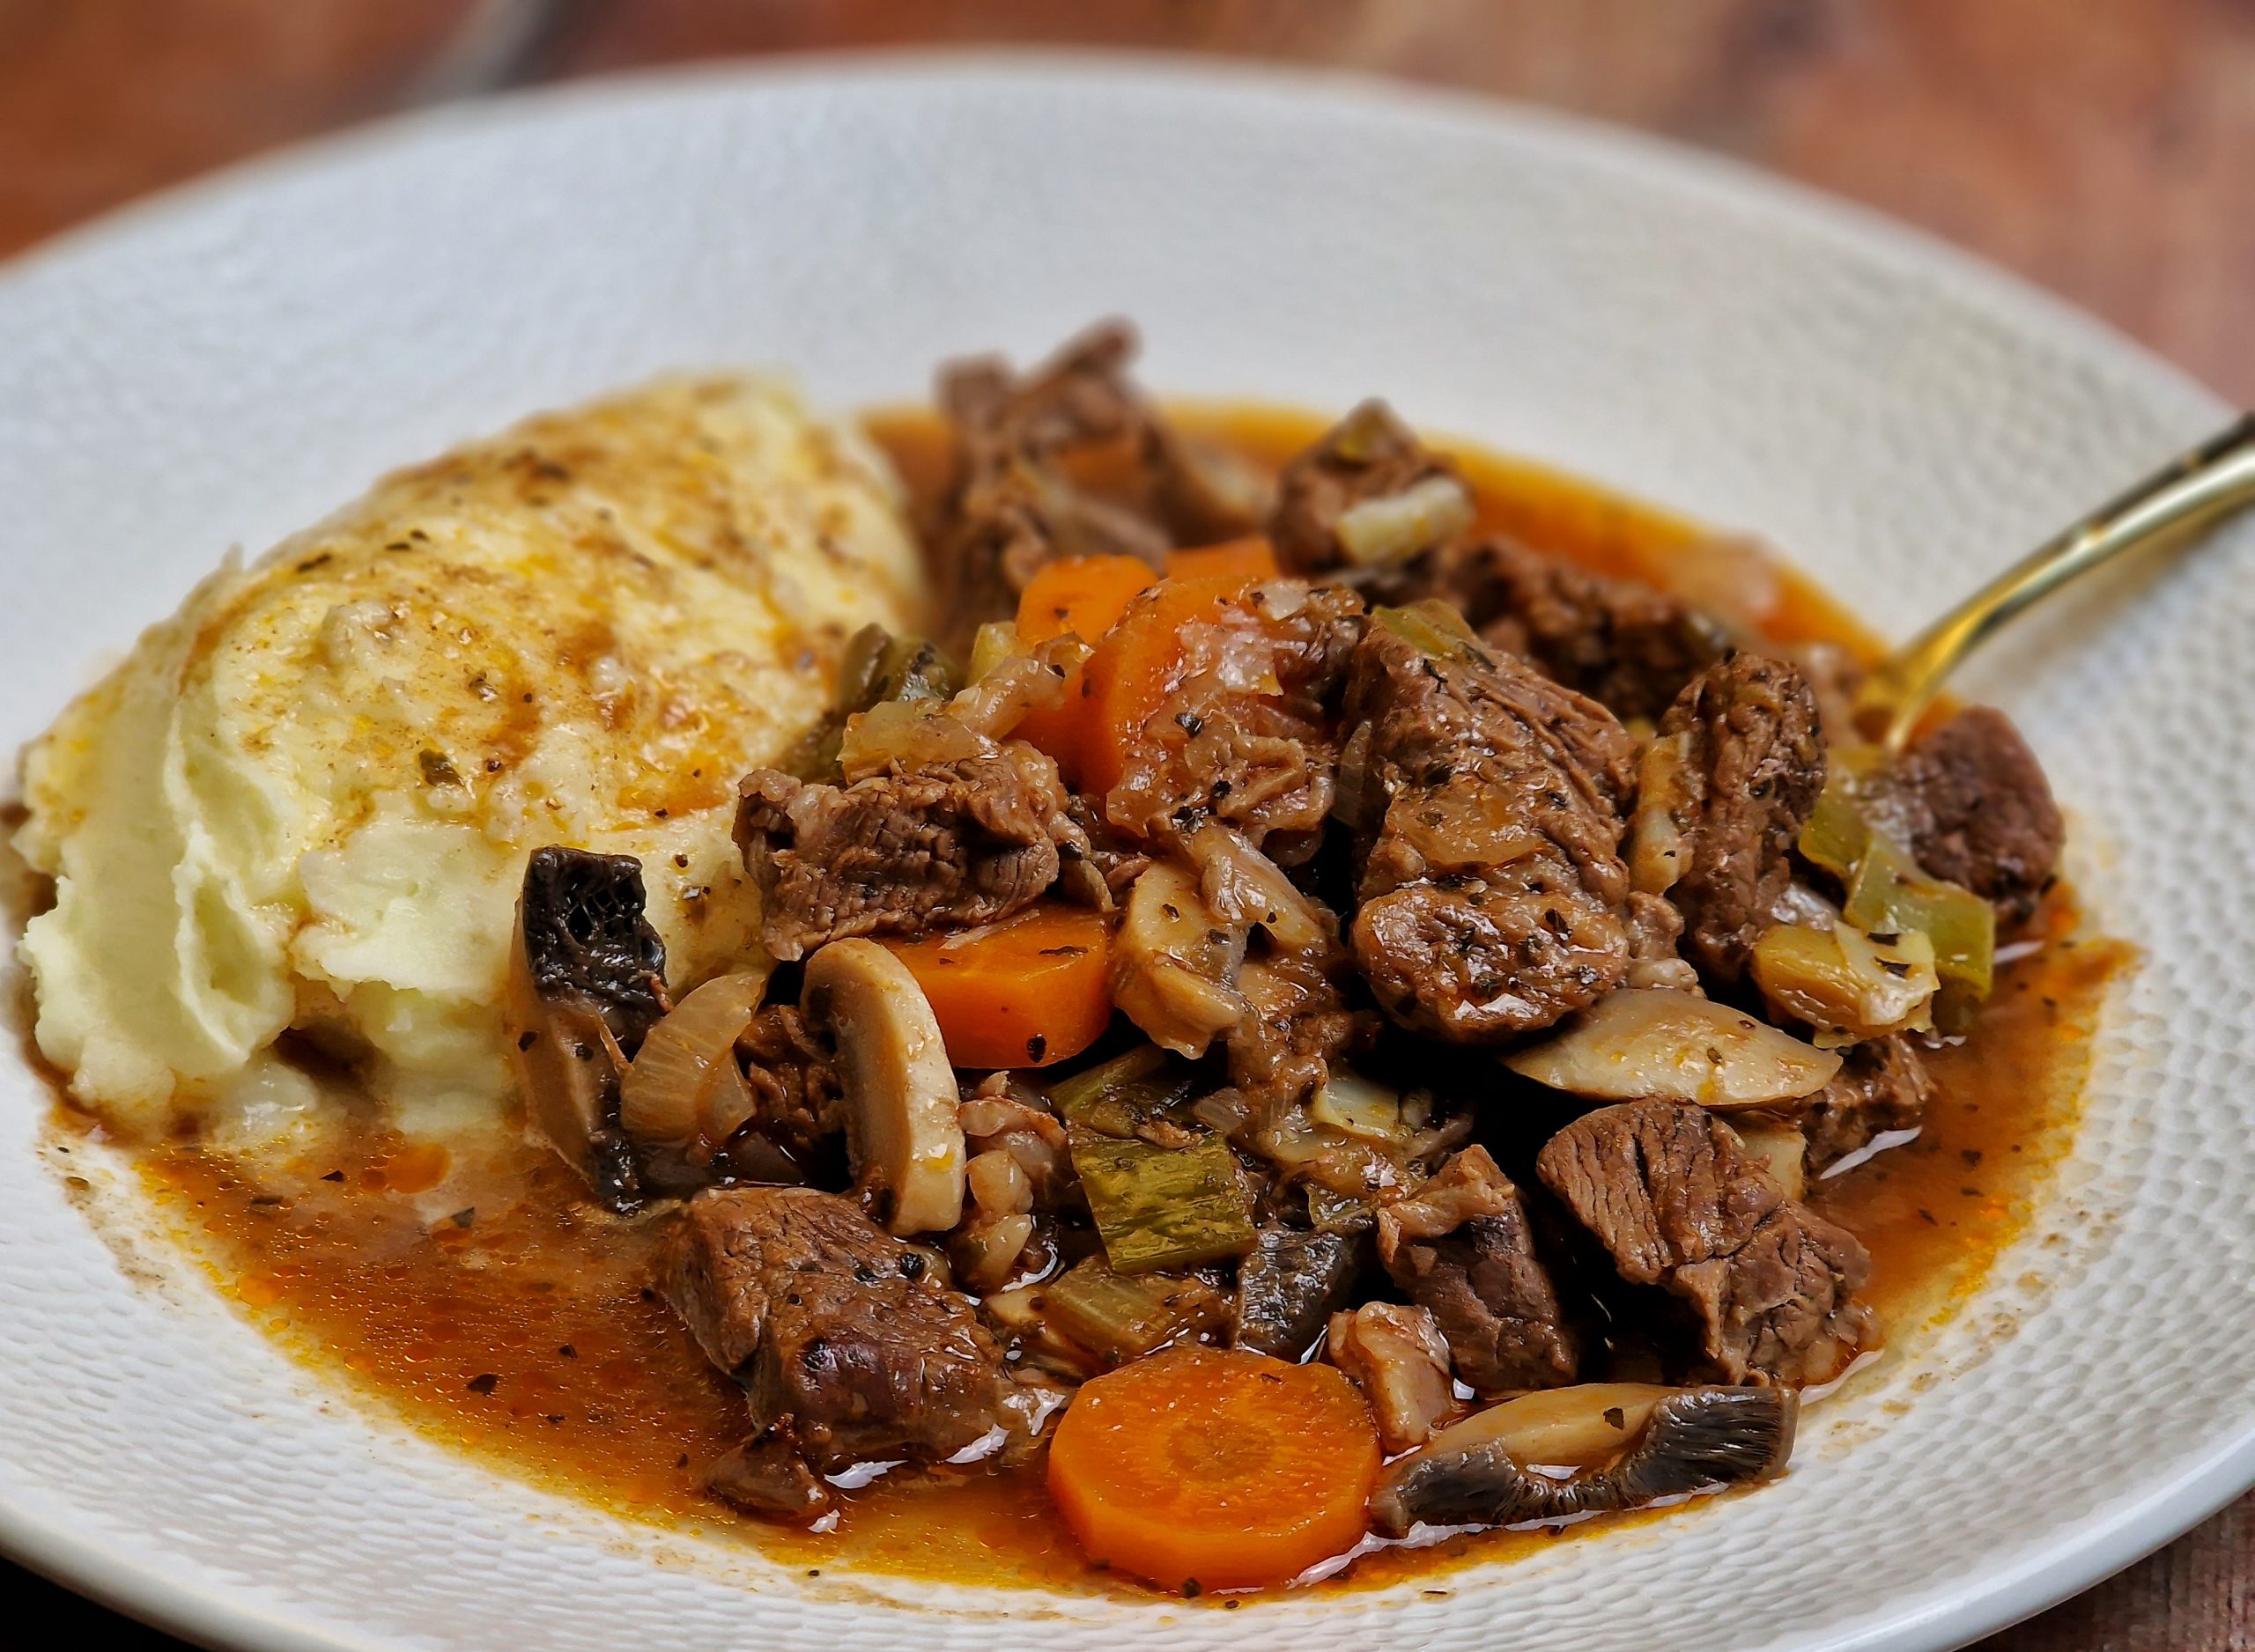 A bowl of beef and vegetable casserole with mashed potato